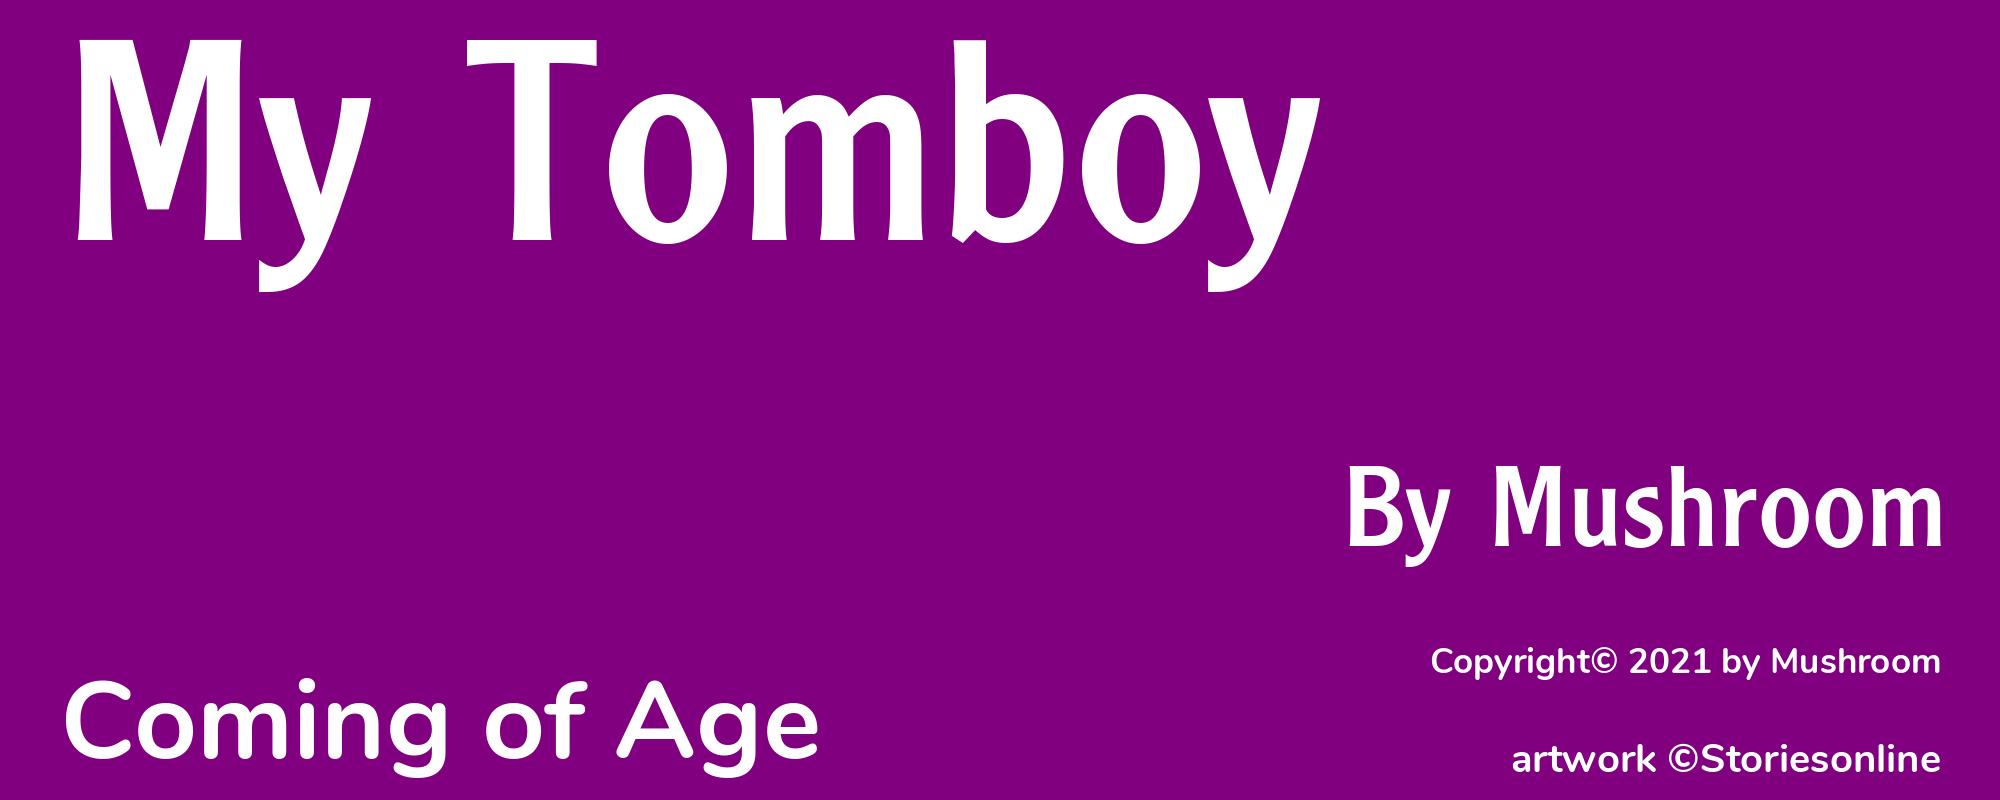 My Tomboy - Cover